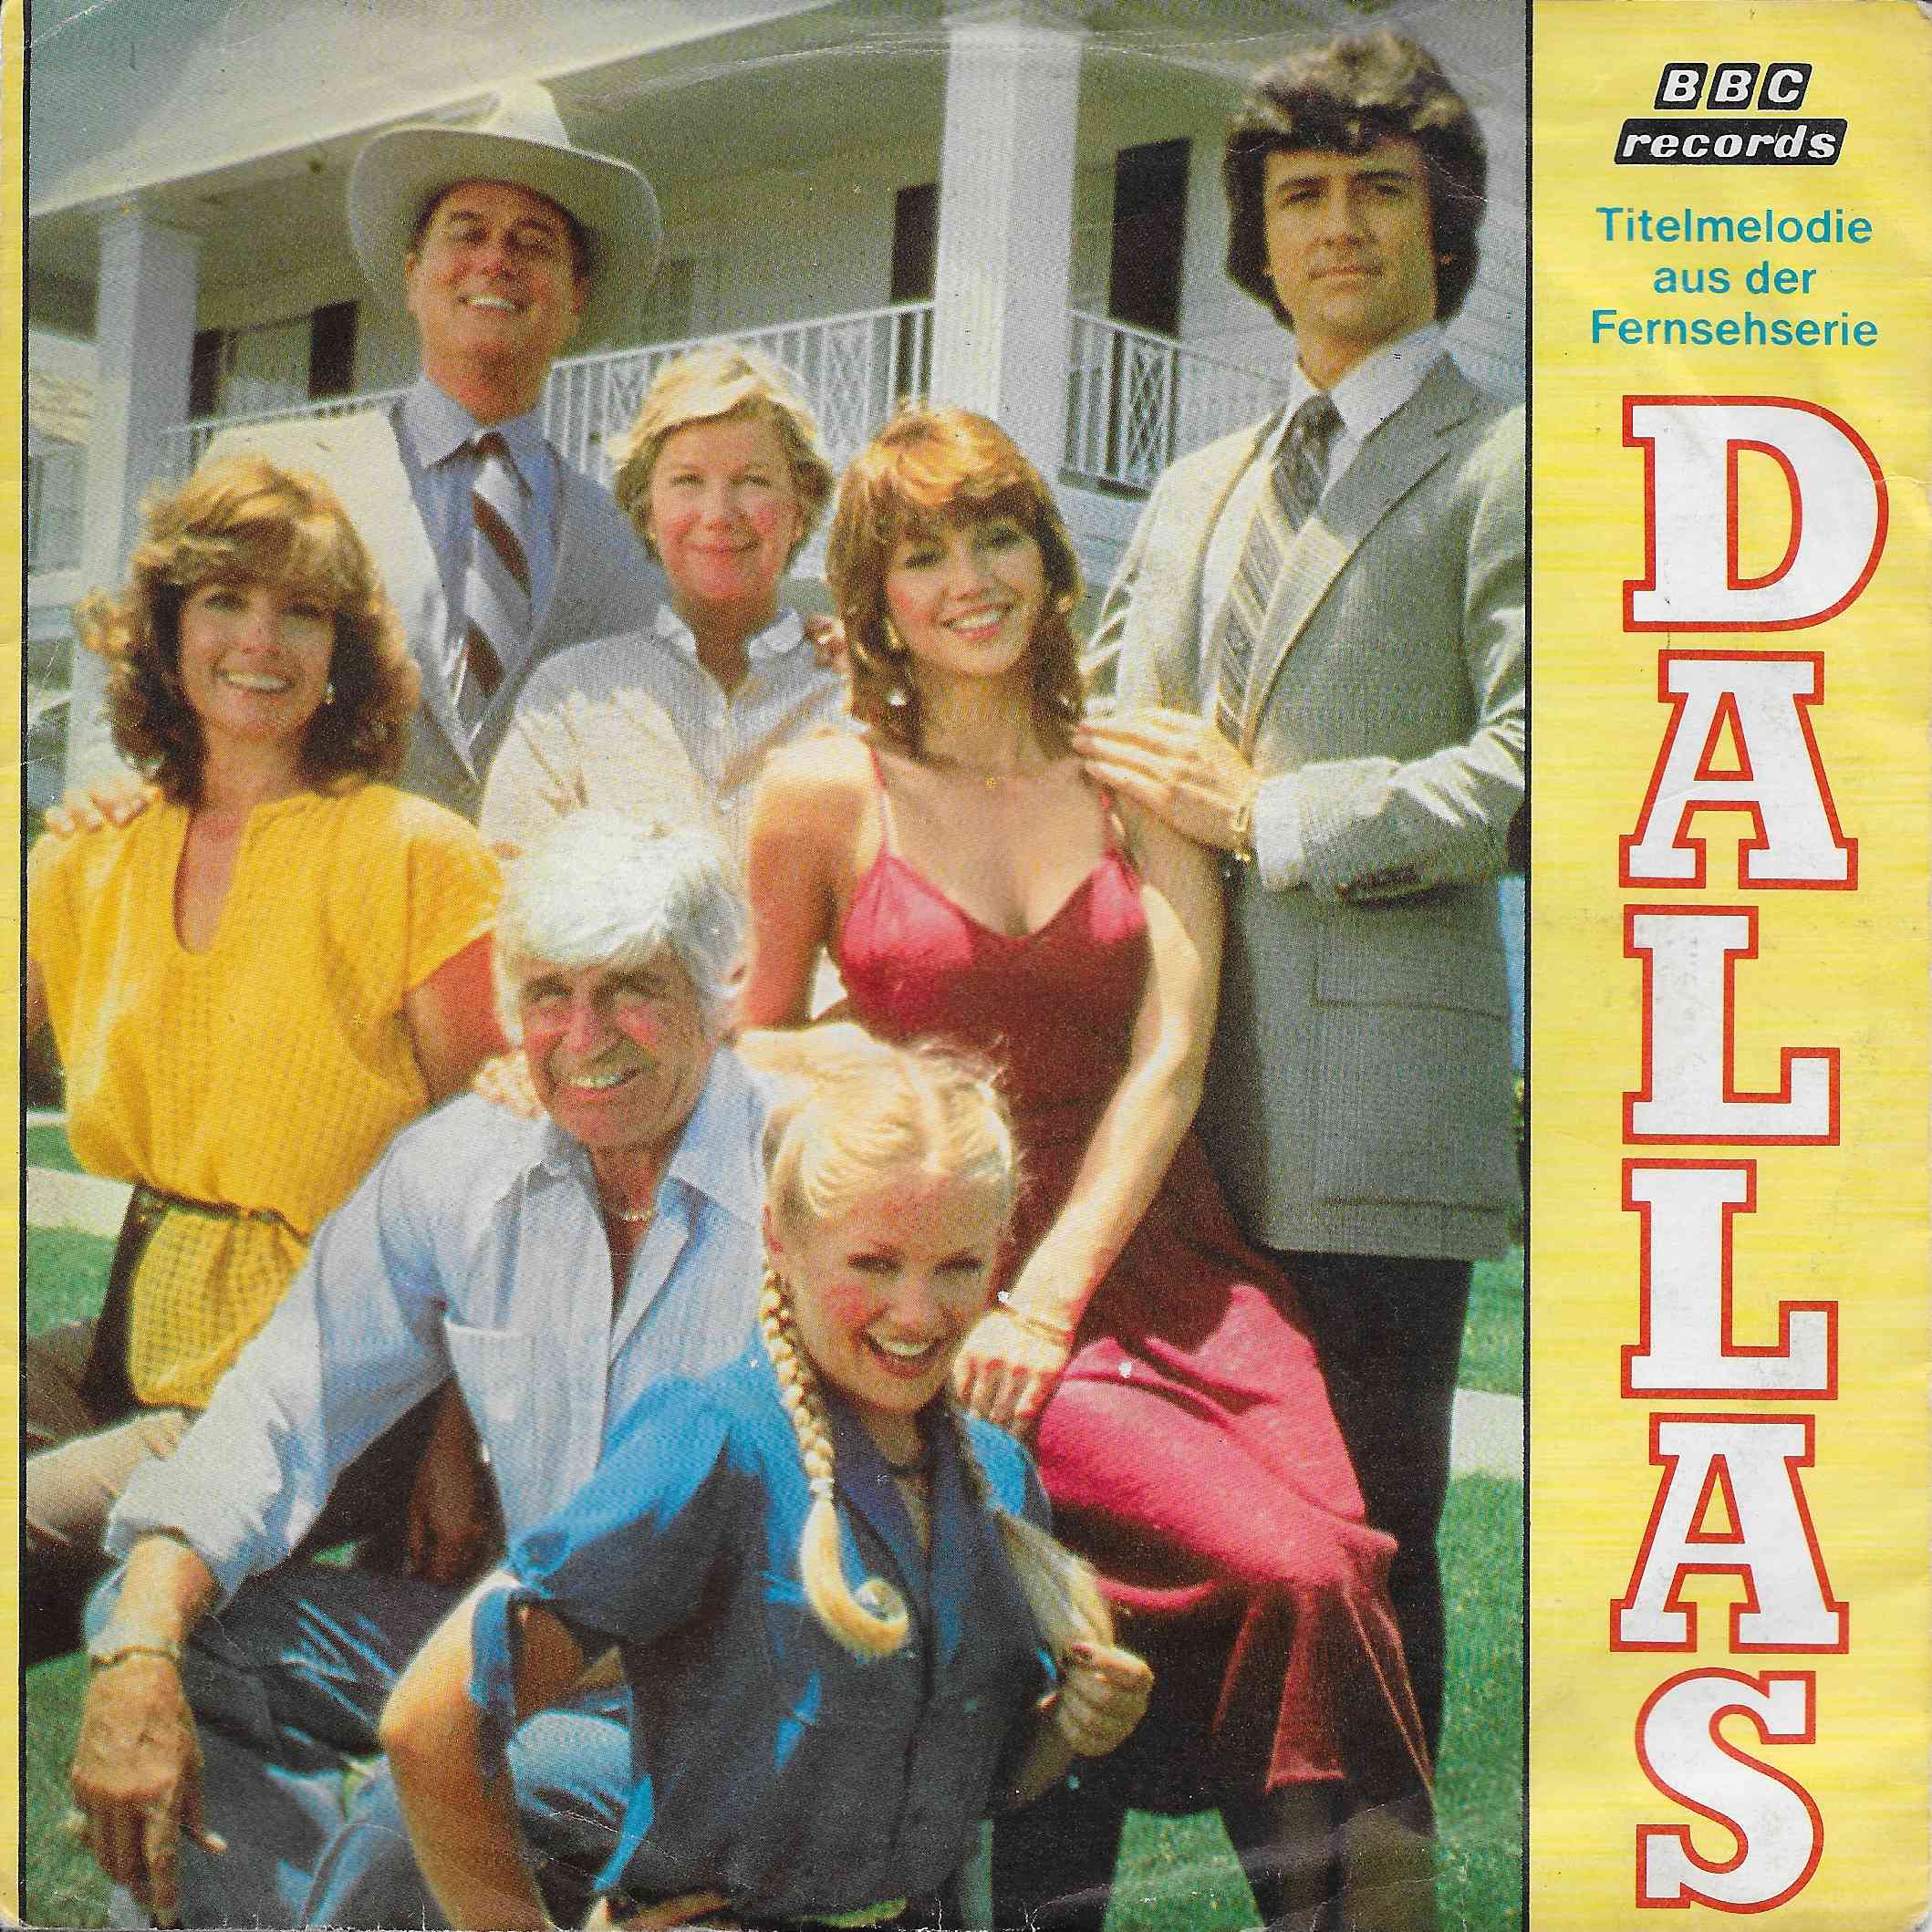 Picture of INT 113.007 Dallas (German import) by artist Jerrold Immel from the BBC records and Tapes library